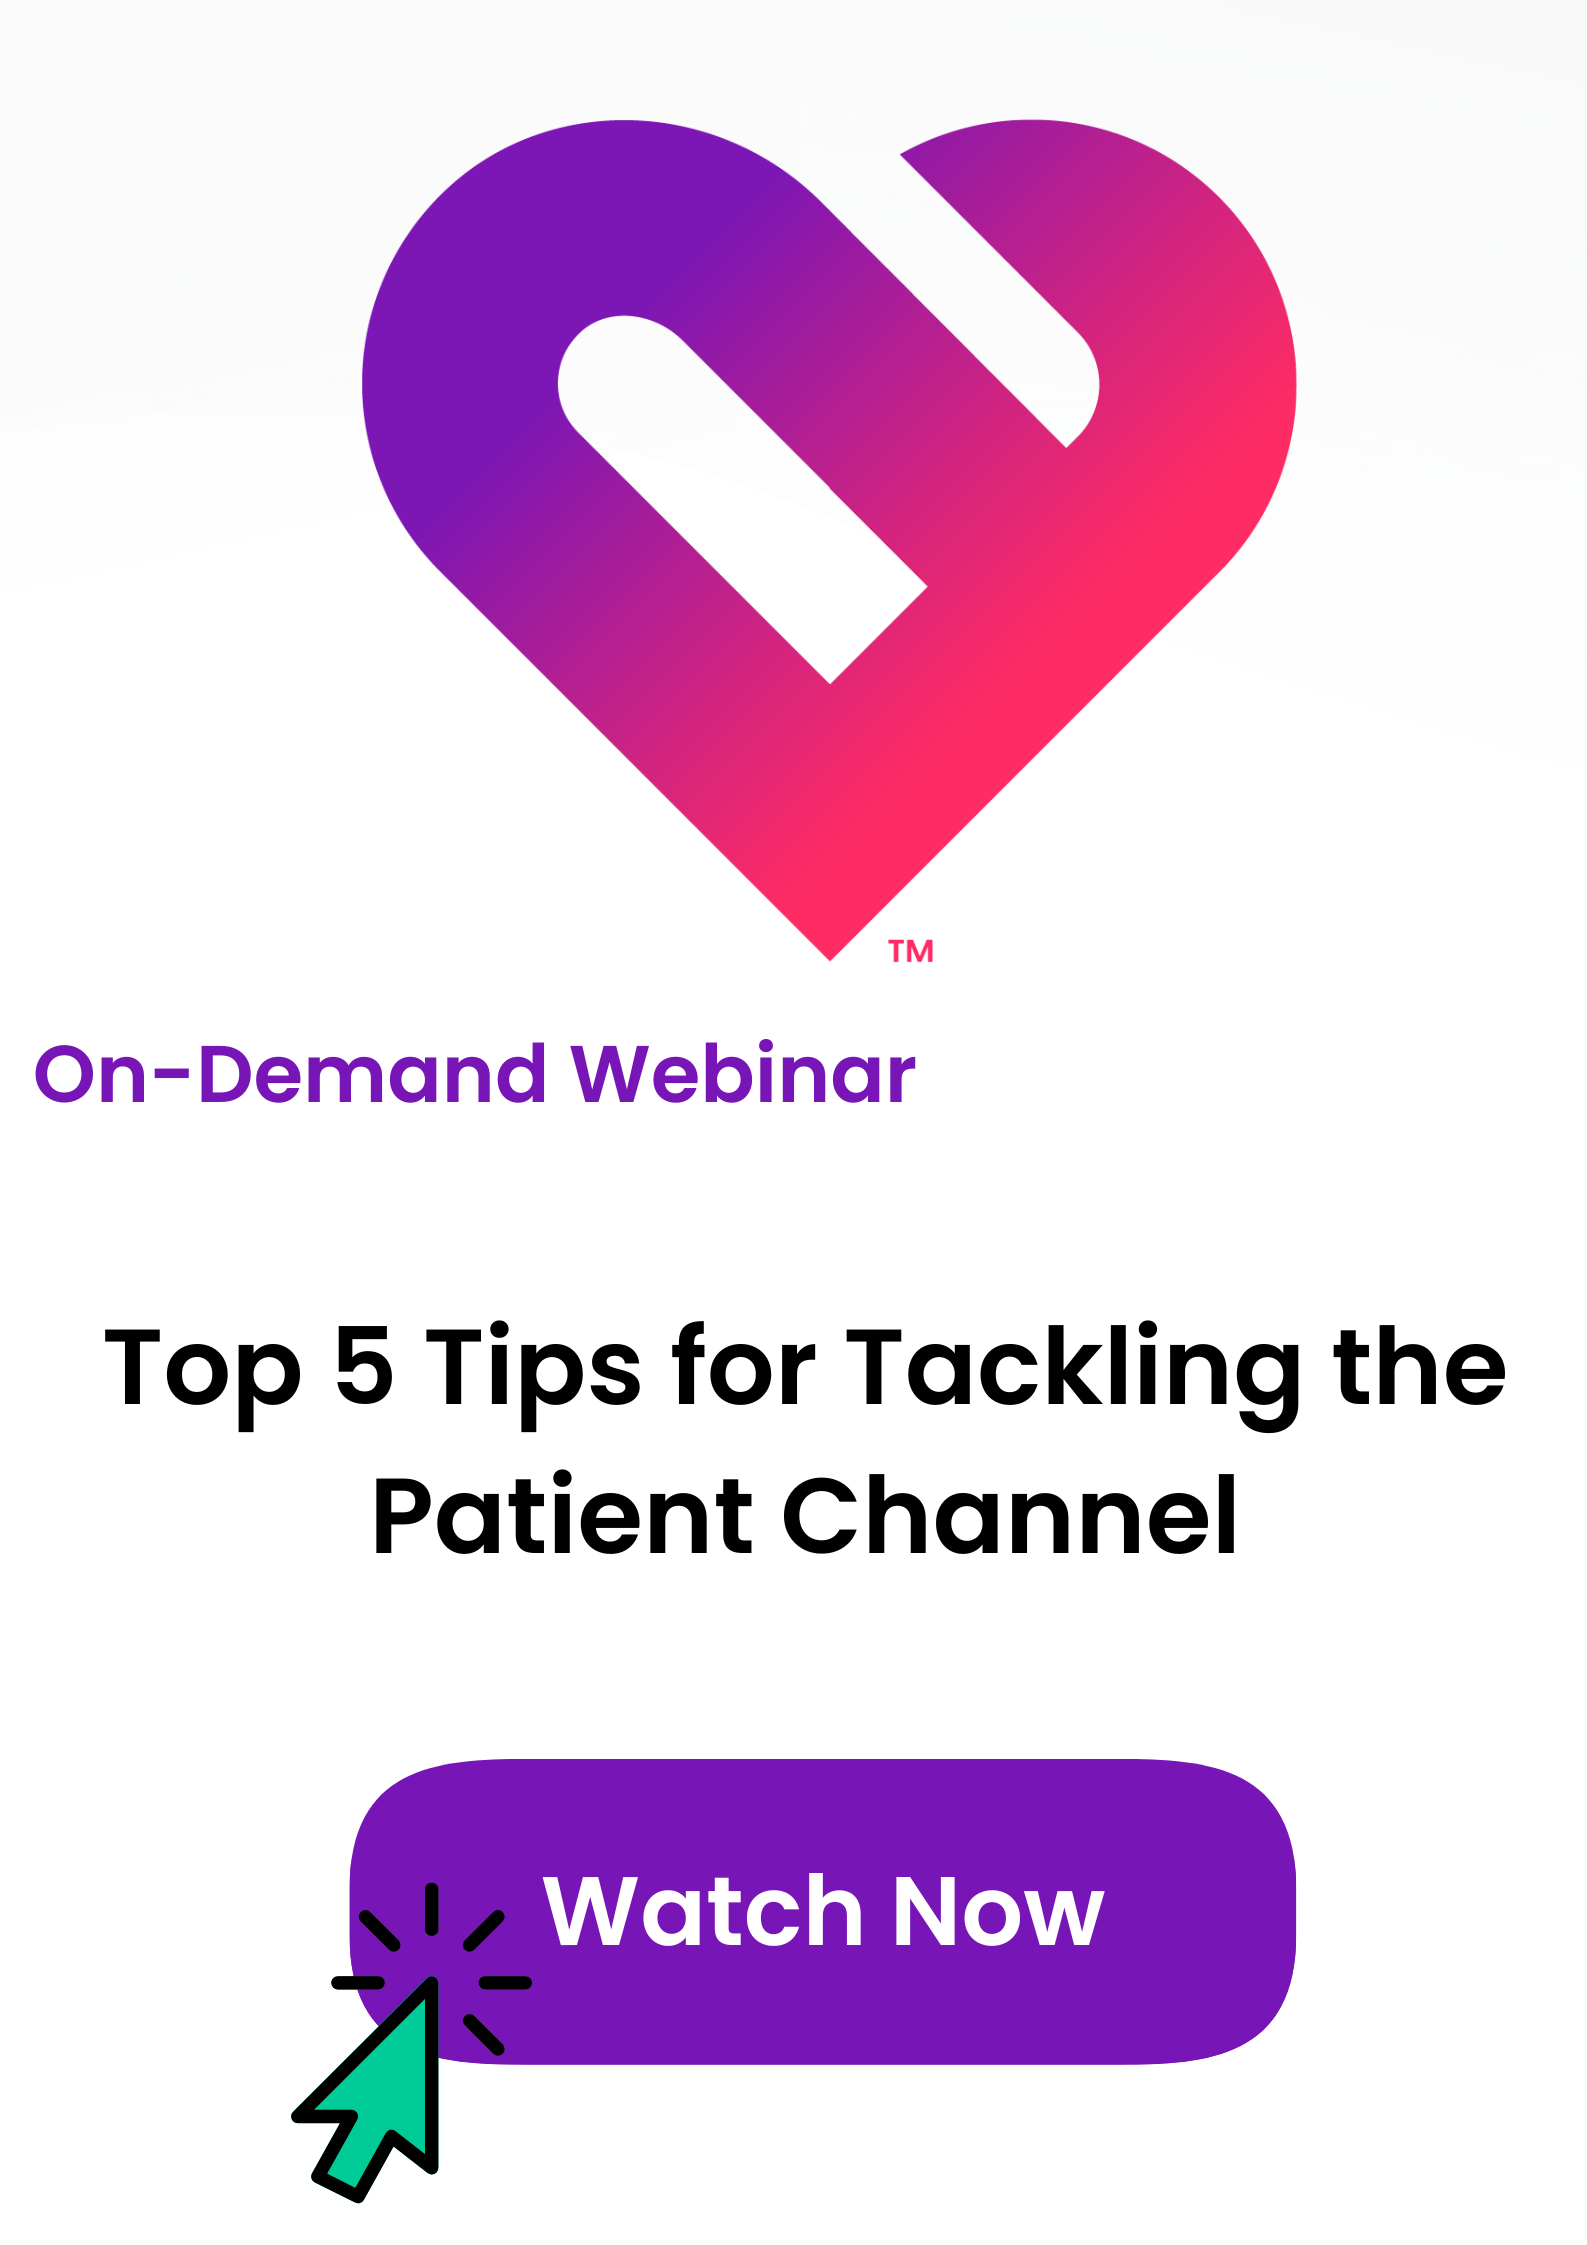 On-demand webinar tile for Top 5 Tips for Tackling the Patient Channel, click to watch now